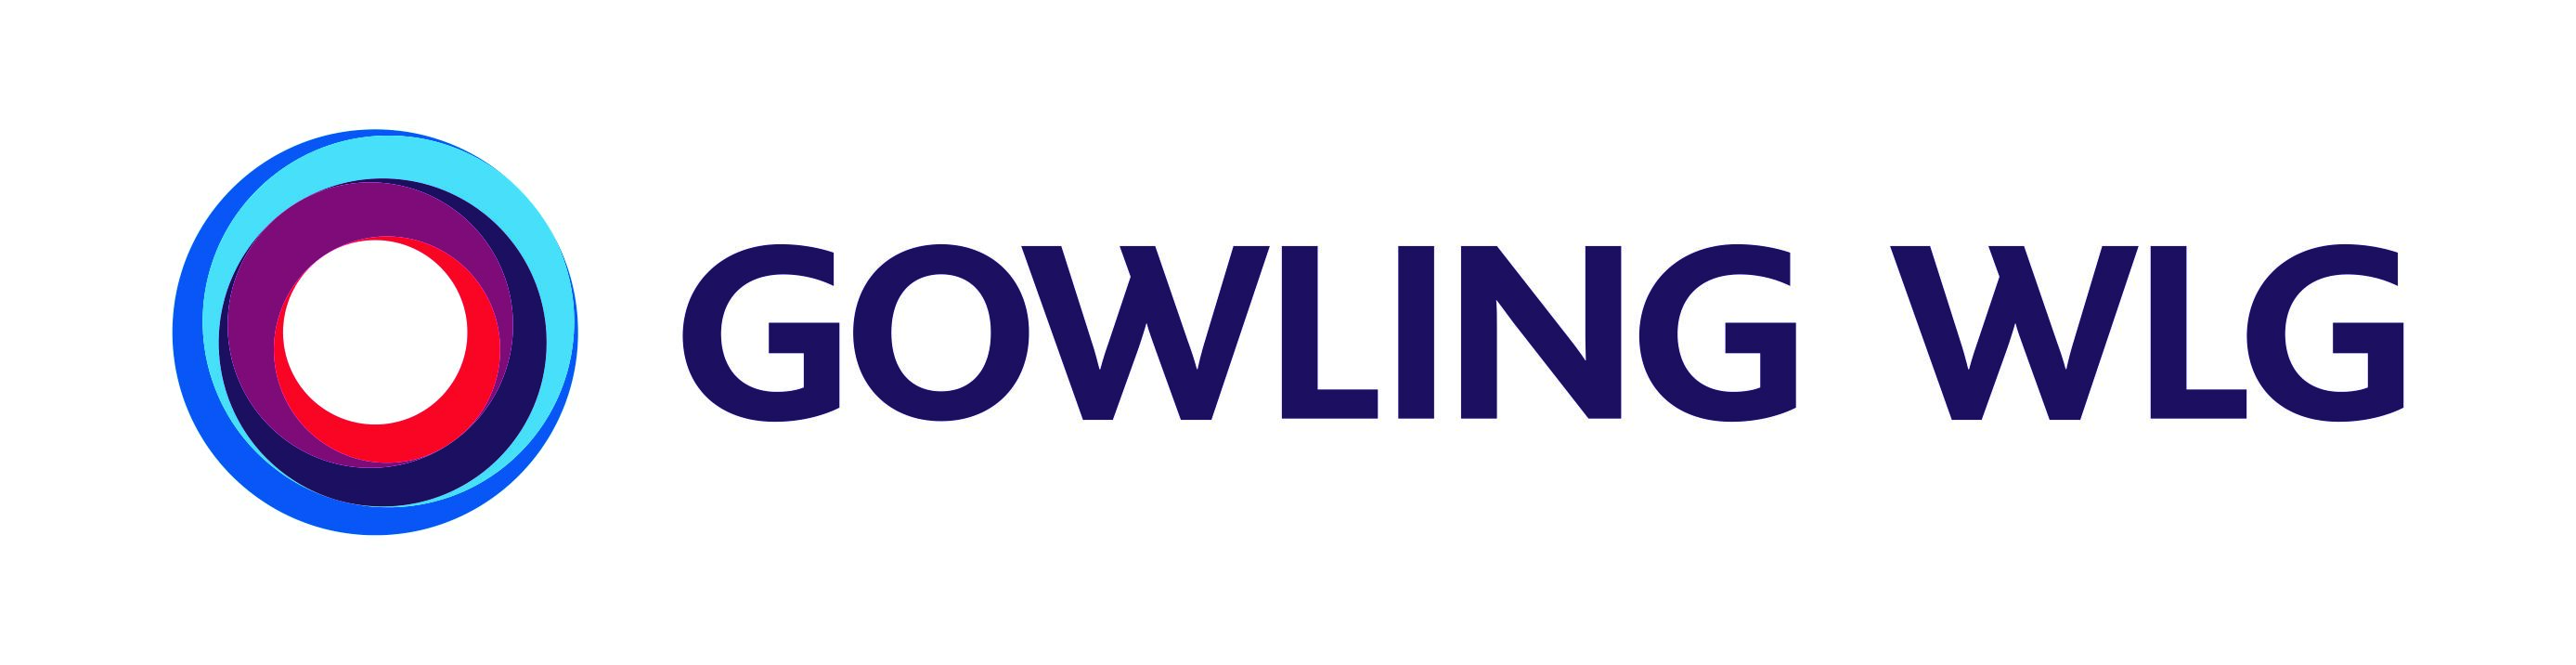 Gowling WLG LLP icon